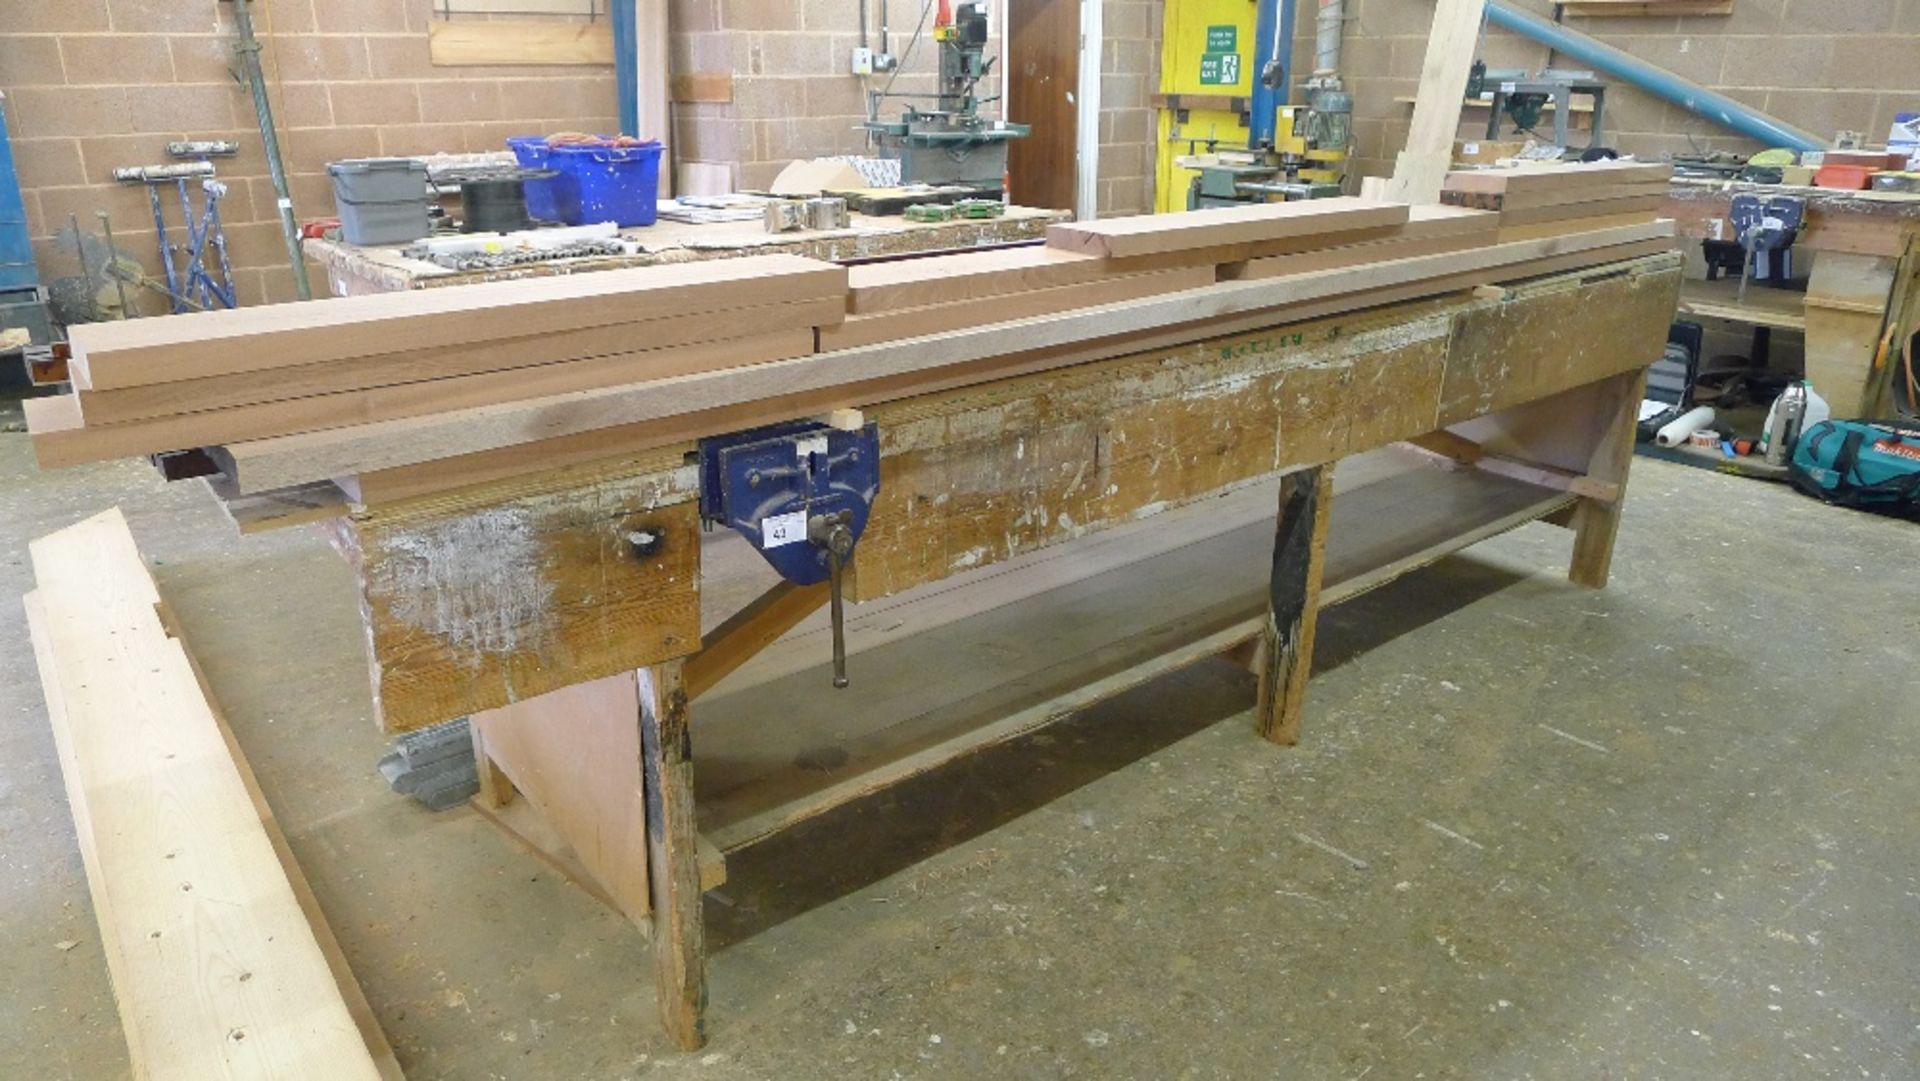 1 wooden work bench with a wood workers vice fitted, approx 3.4m x 1m (the wood shown on top of